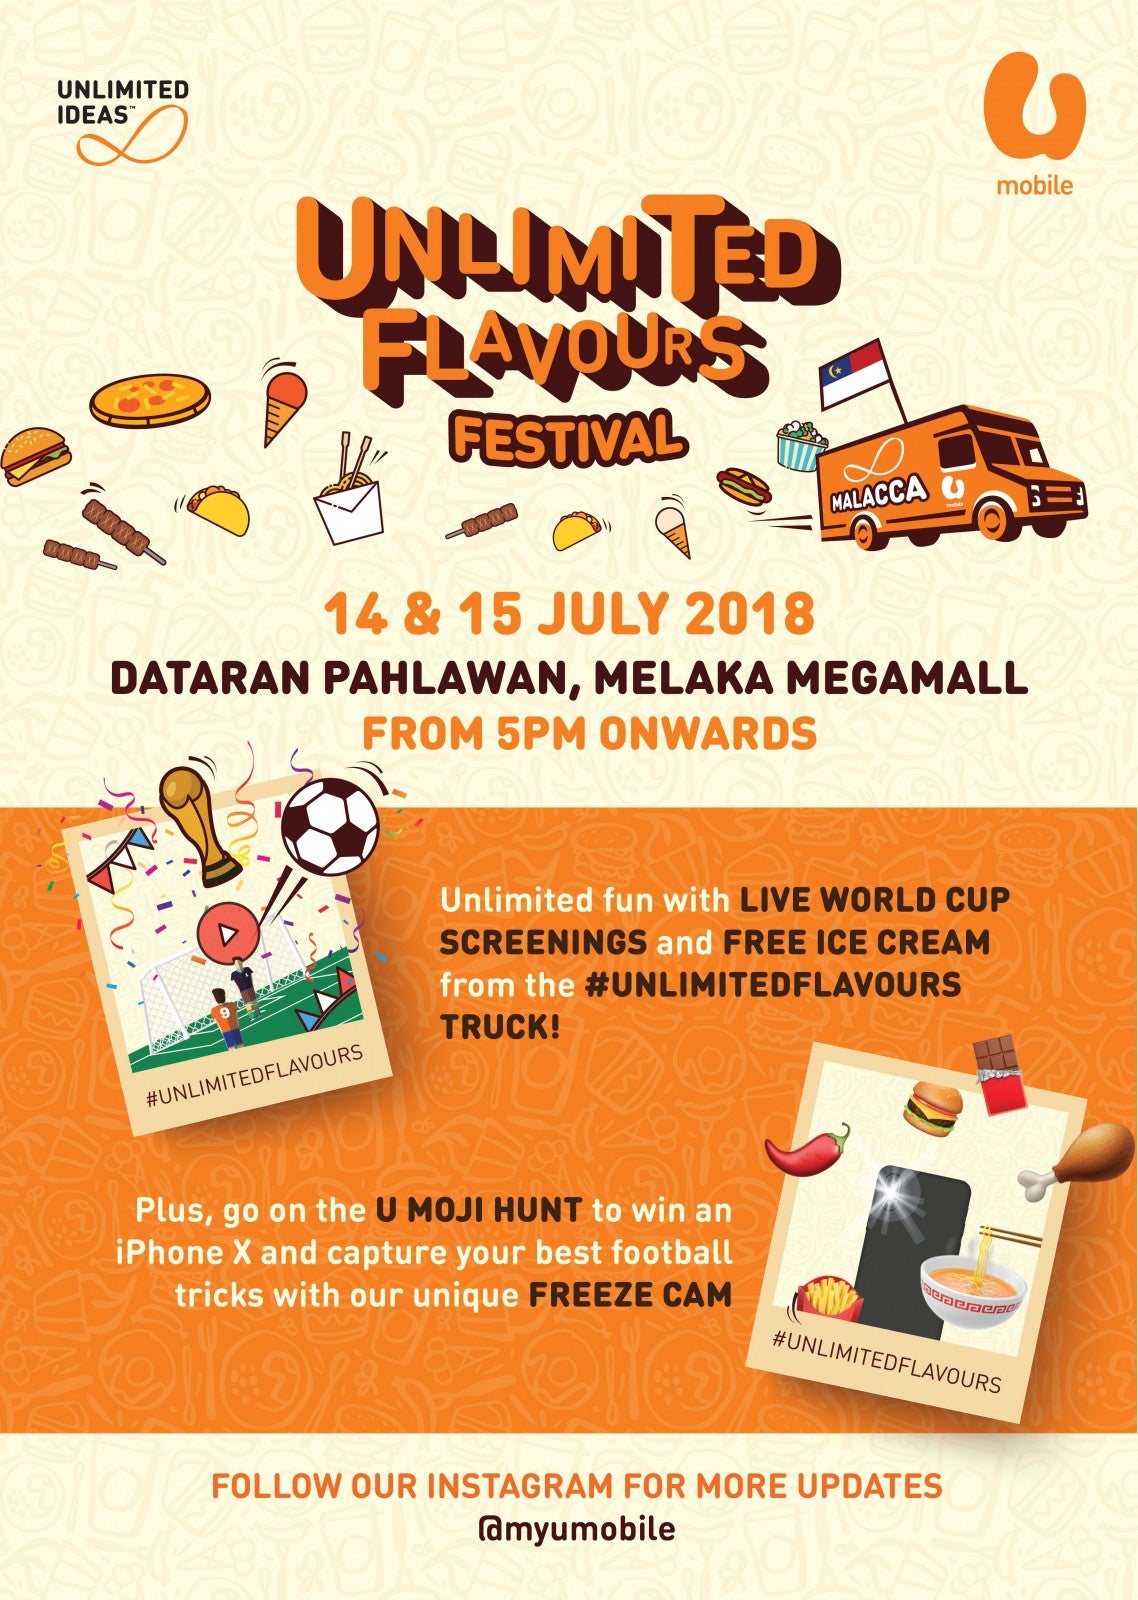 FREE Softserve and 4 Other Things At #UnlimitedFlavours Festival M'sians Must NOT Miss - WORLD OF BUZZ 1